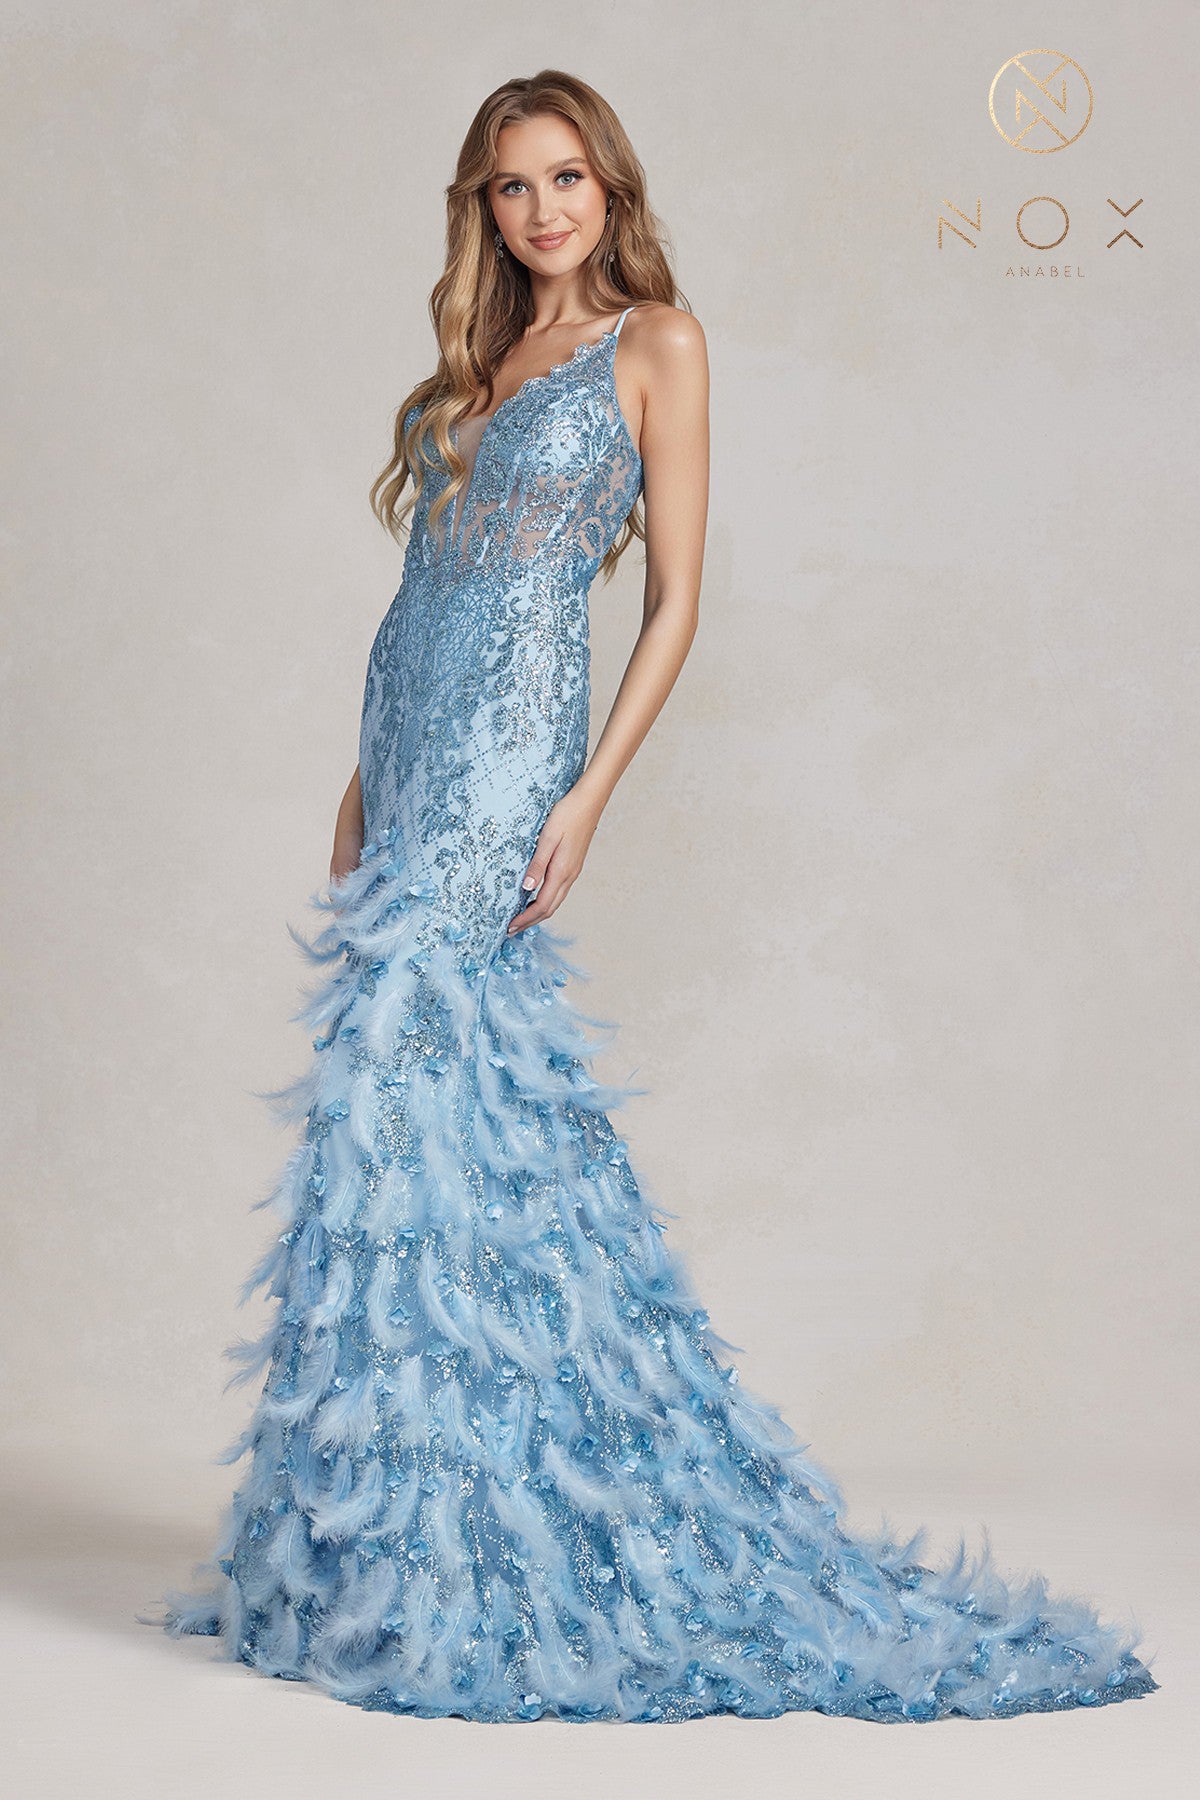 Nox Anabel C1111 Long Sheer Bodice with plunging neckline, Glitter 3D Lace embellished Feather Mermaid Skirt with train. Prom Dress Formal Evening Gown with corset back.  Sizes: 00-16  Colors: Black, Mauve, Light Blue